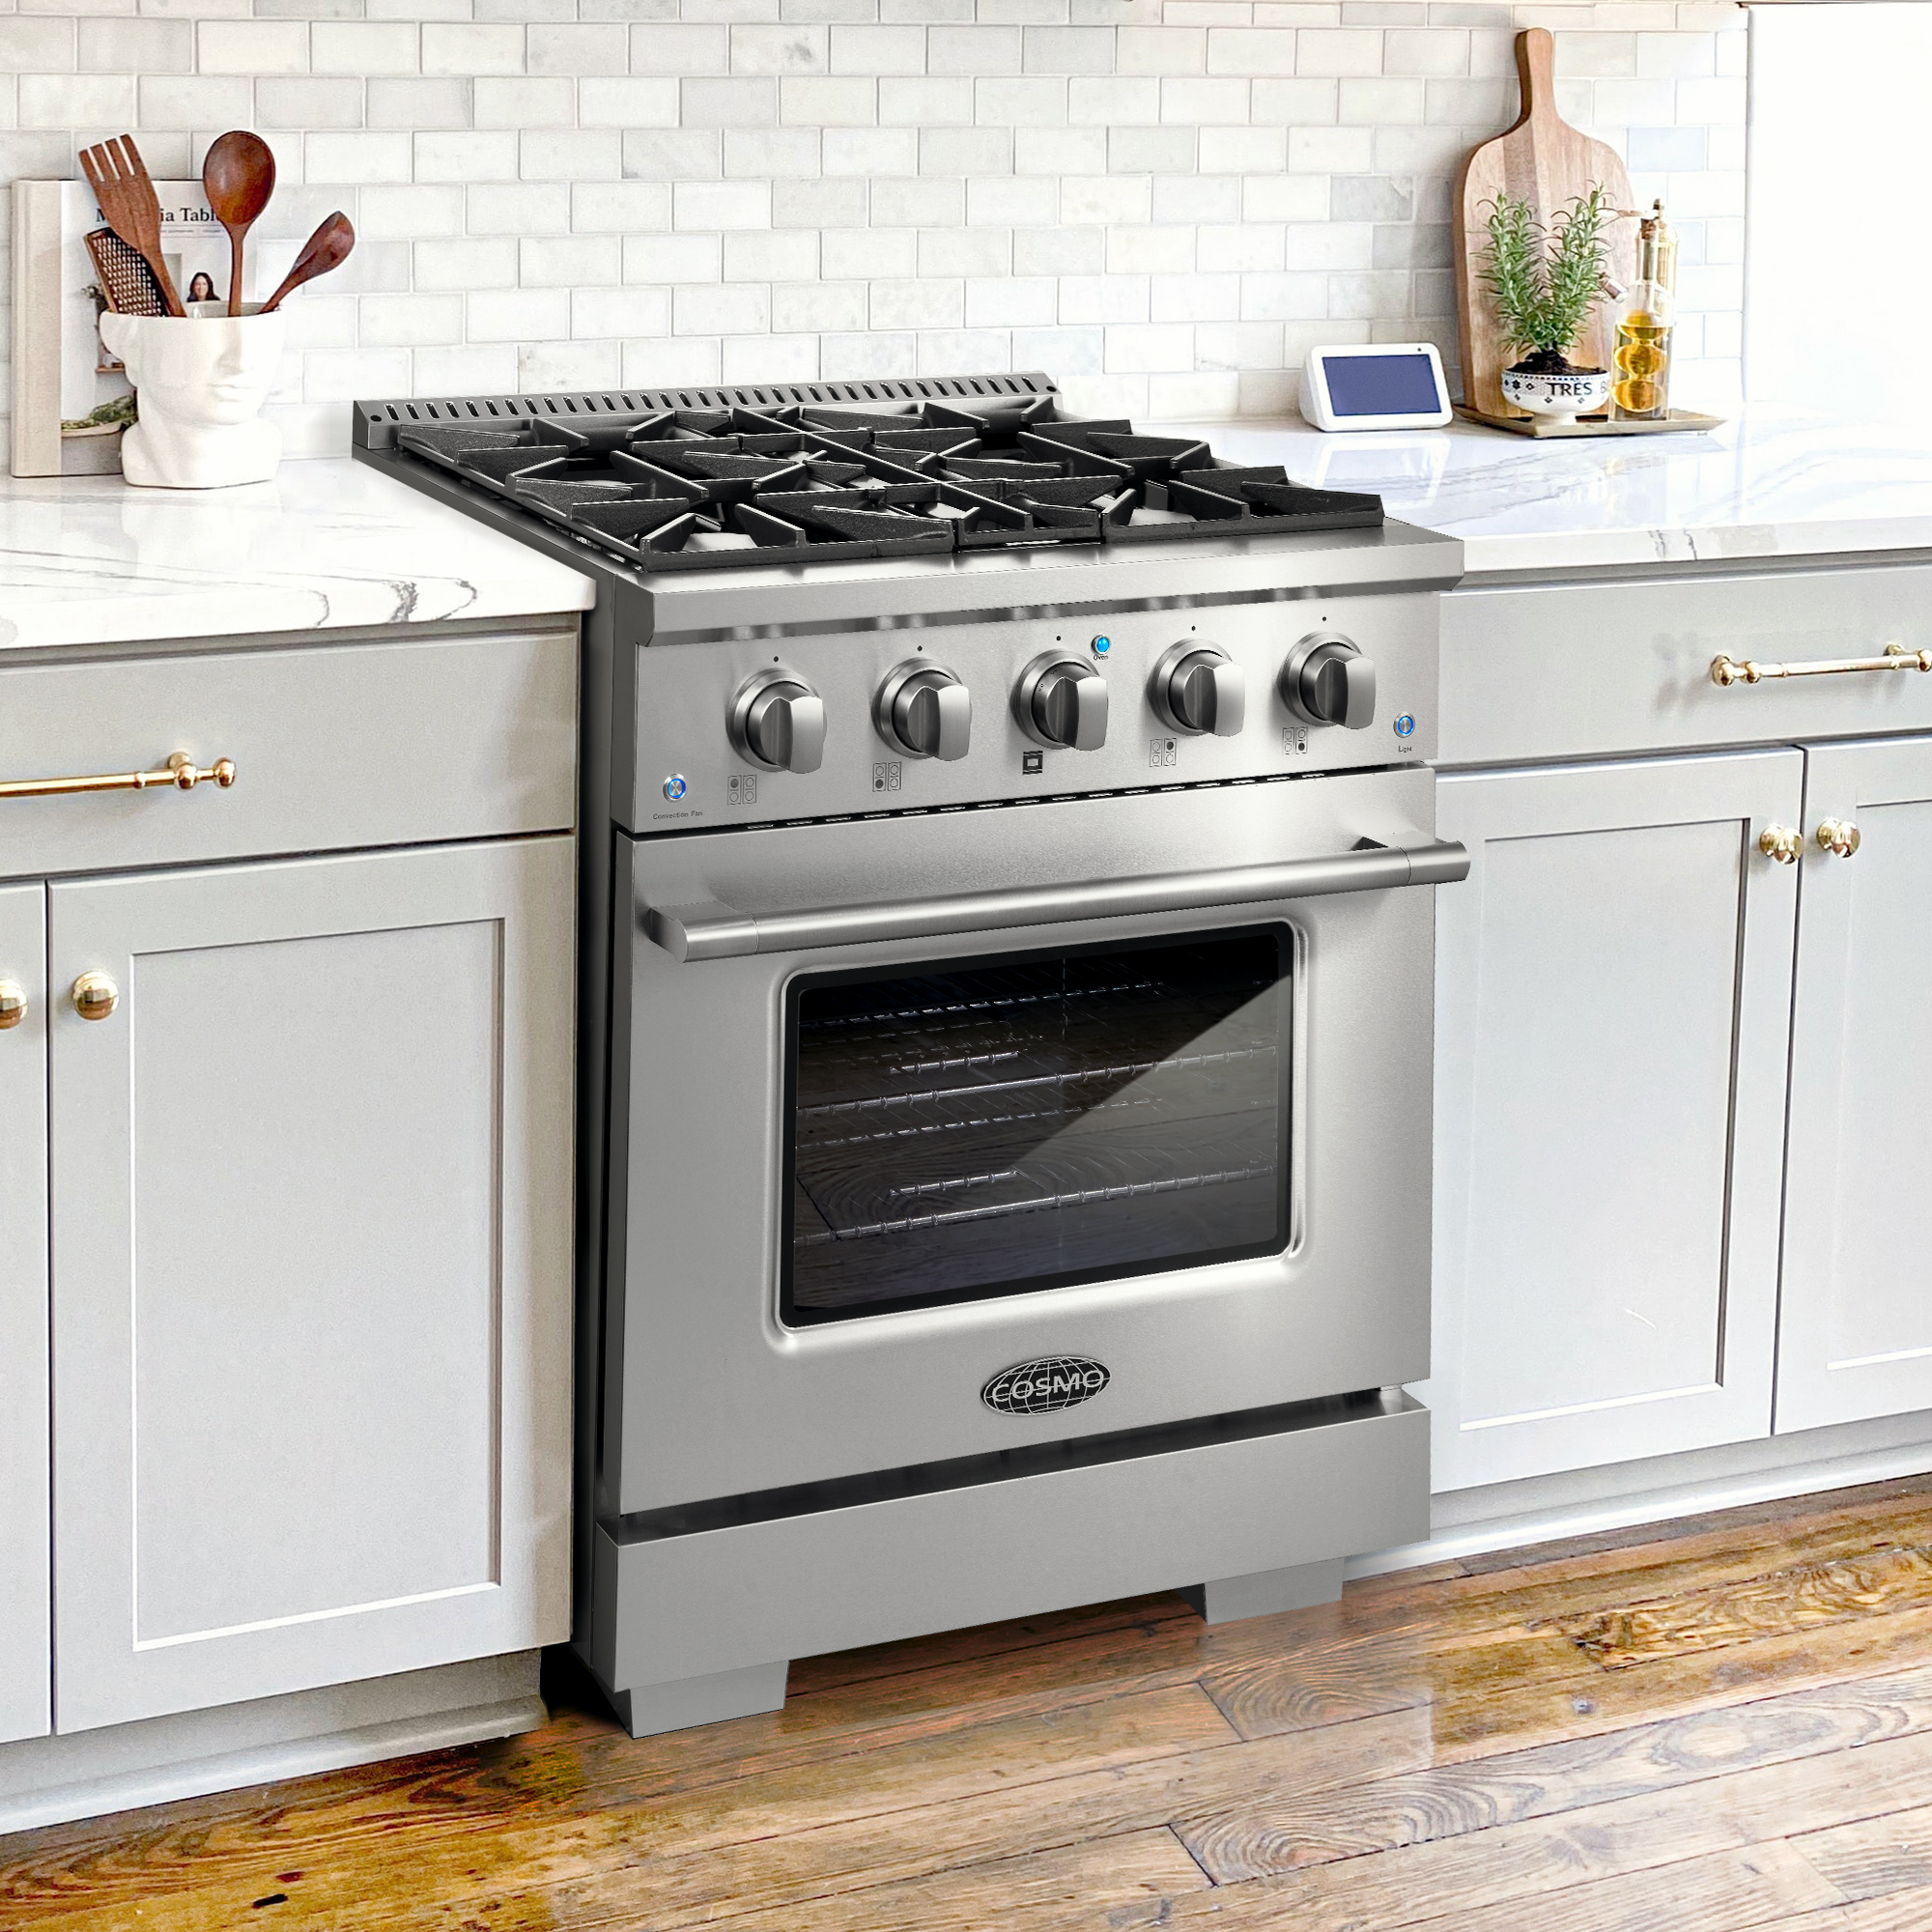 30 in. Slide-In Freestanding Gas Range with 4 Sealed Burner Cooktop,  Convection Oven (COS-GRP304)